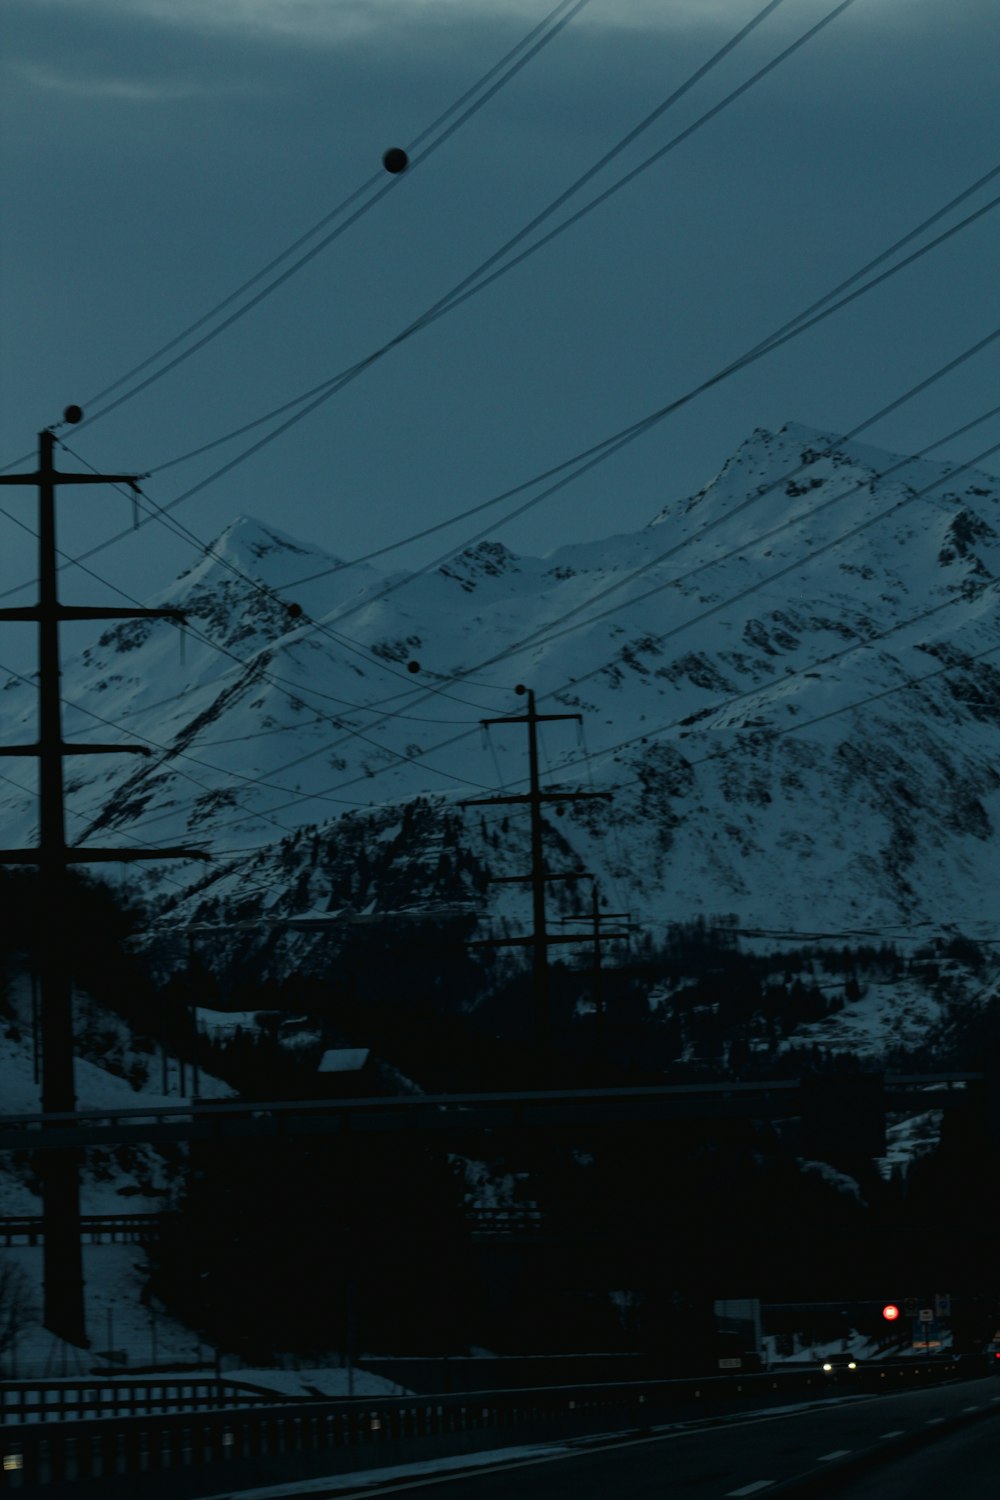 a view of a snow covered mountain with power lines in the foreground